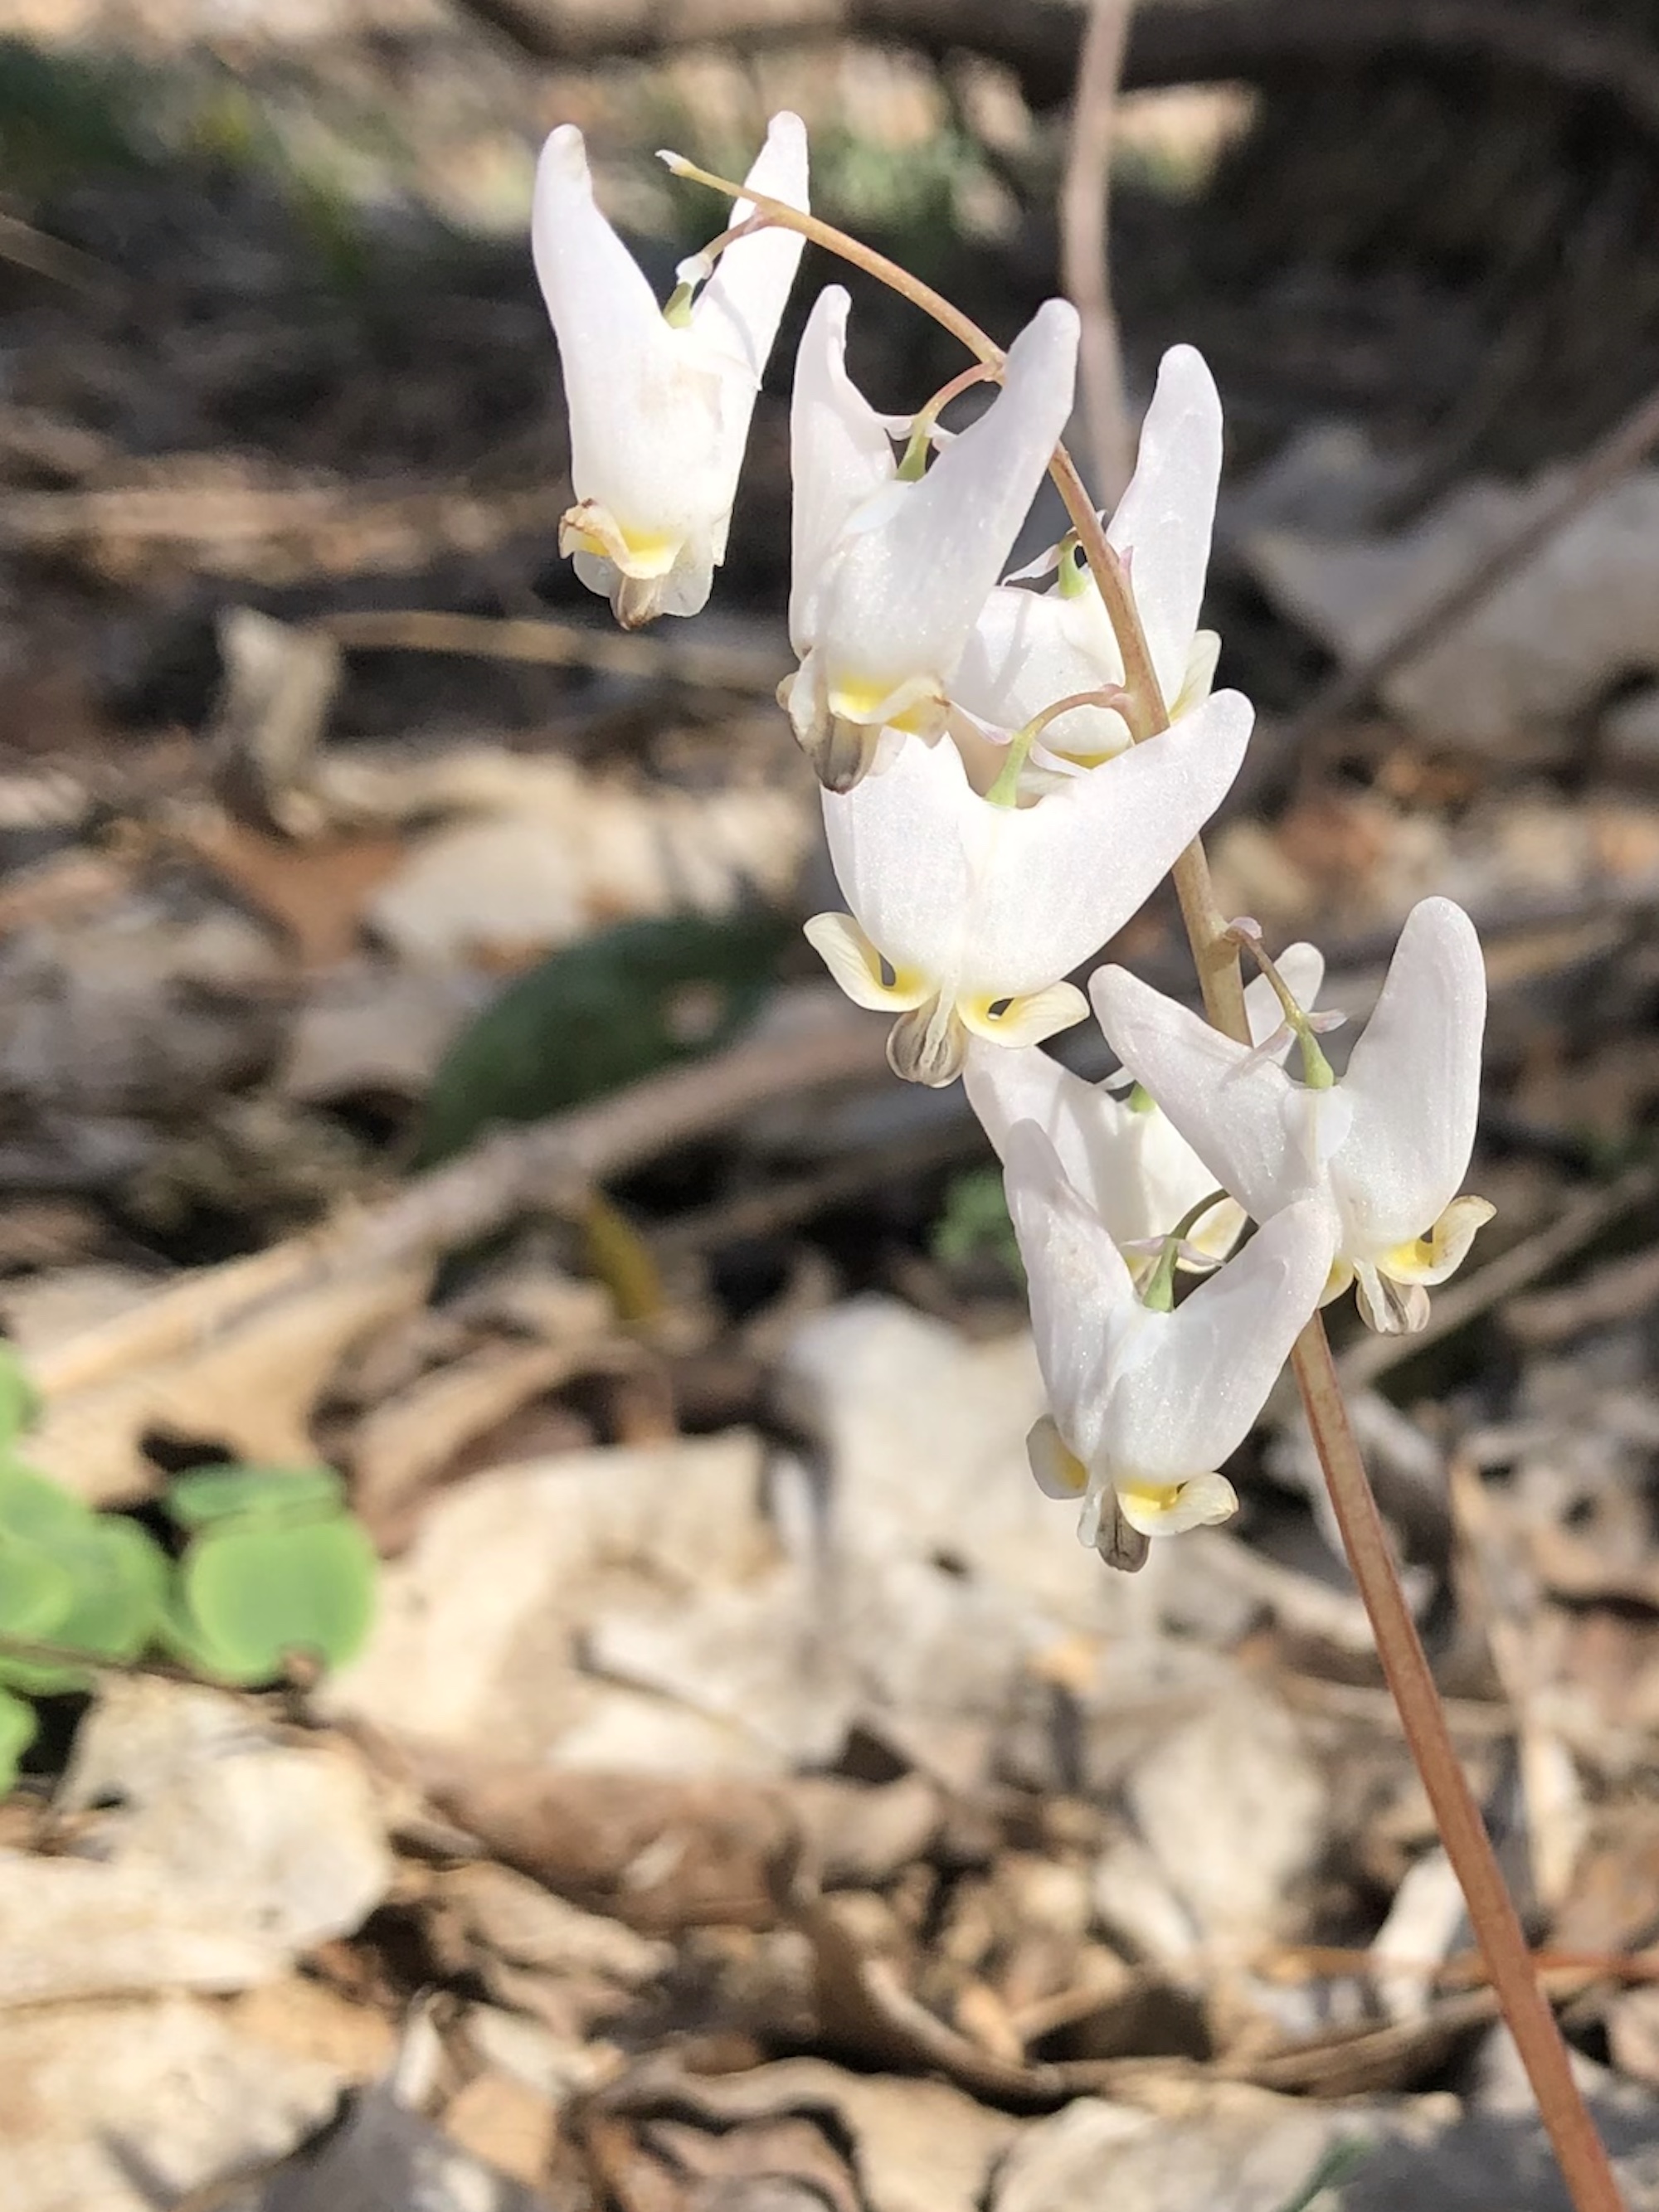 Dutchman's Breeches in woods between Oak Savanna and Marion Dunn Pond in the University of Wisconsin Arboretum on April 18, 2023.